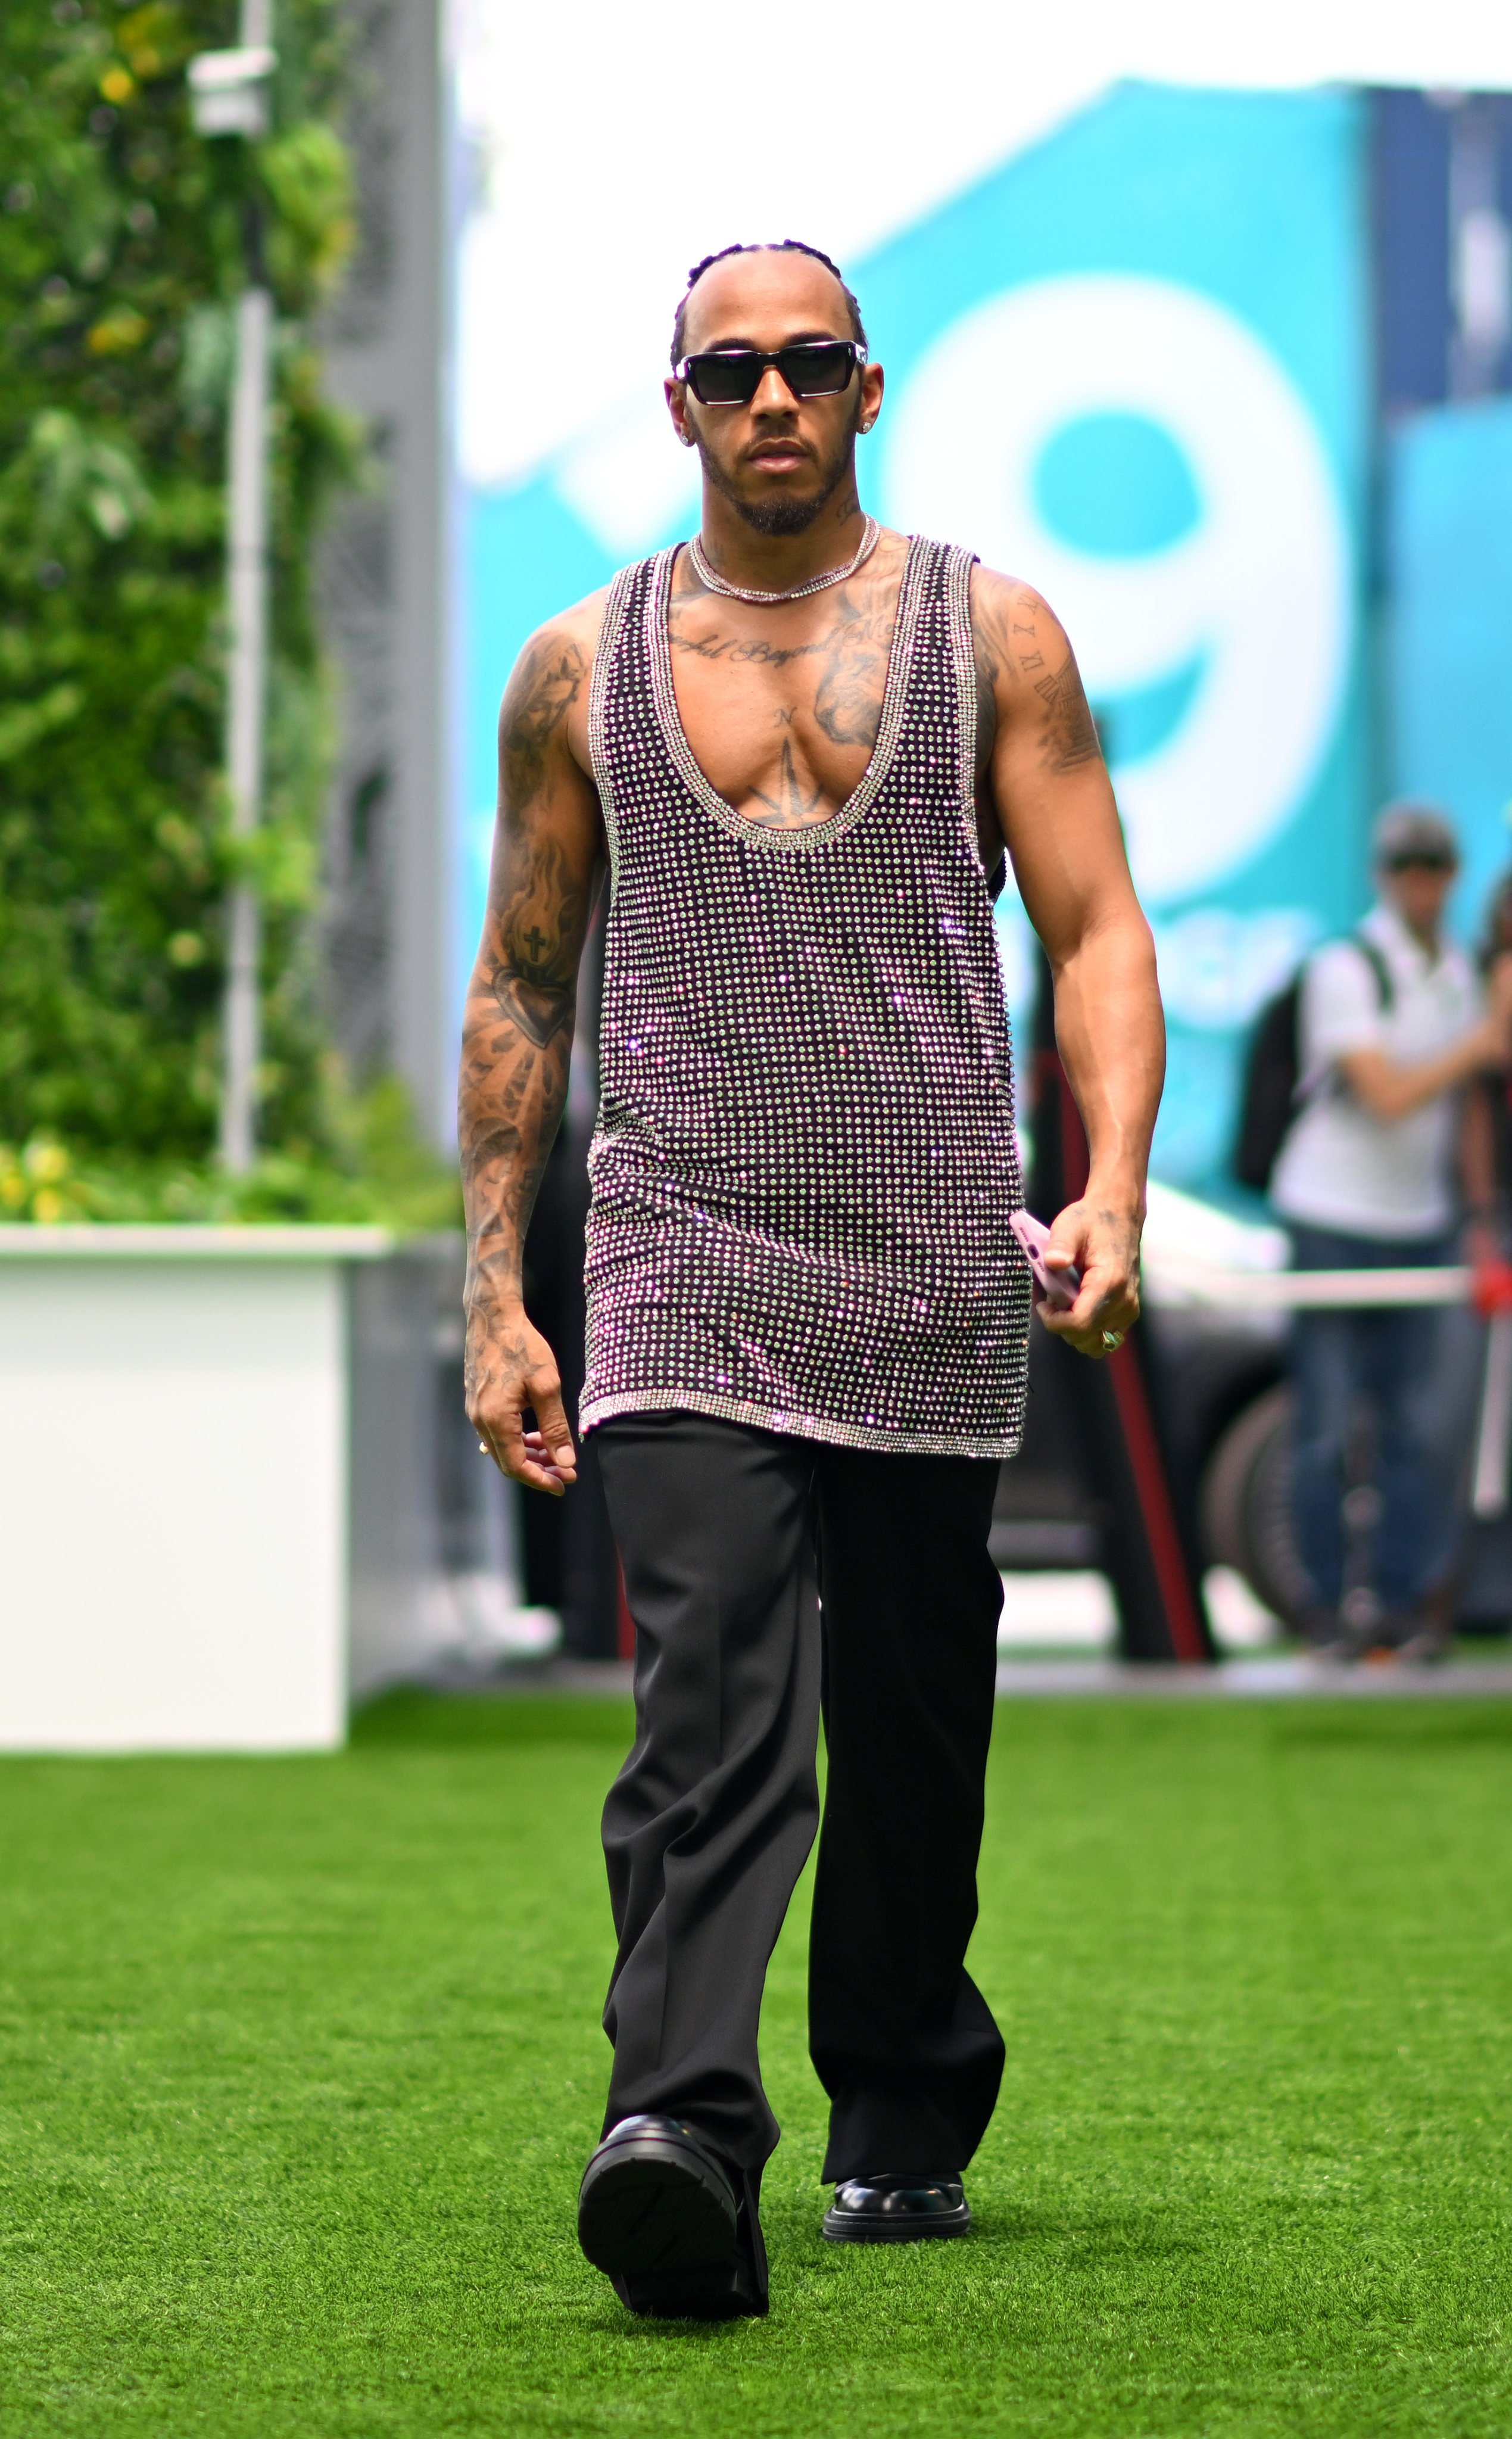 Formula One’s Lewis Hamilton of Great Britain and Mercedes is one of the all-time great drivers, but he also turns heads with his equally confident fashion moves too. Photo: Getty Images